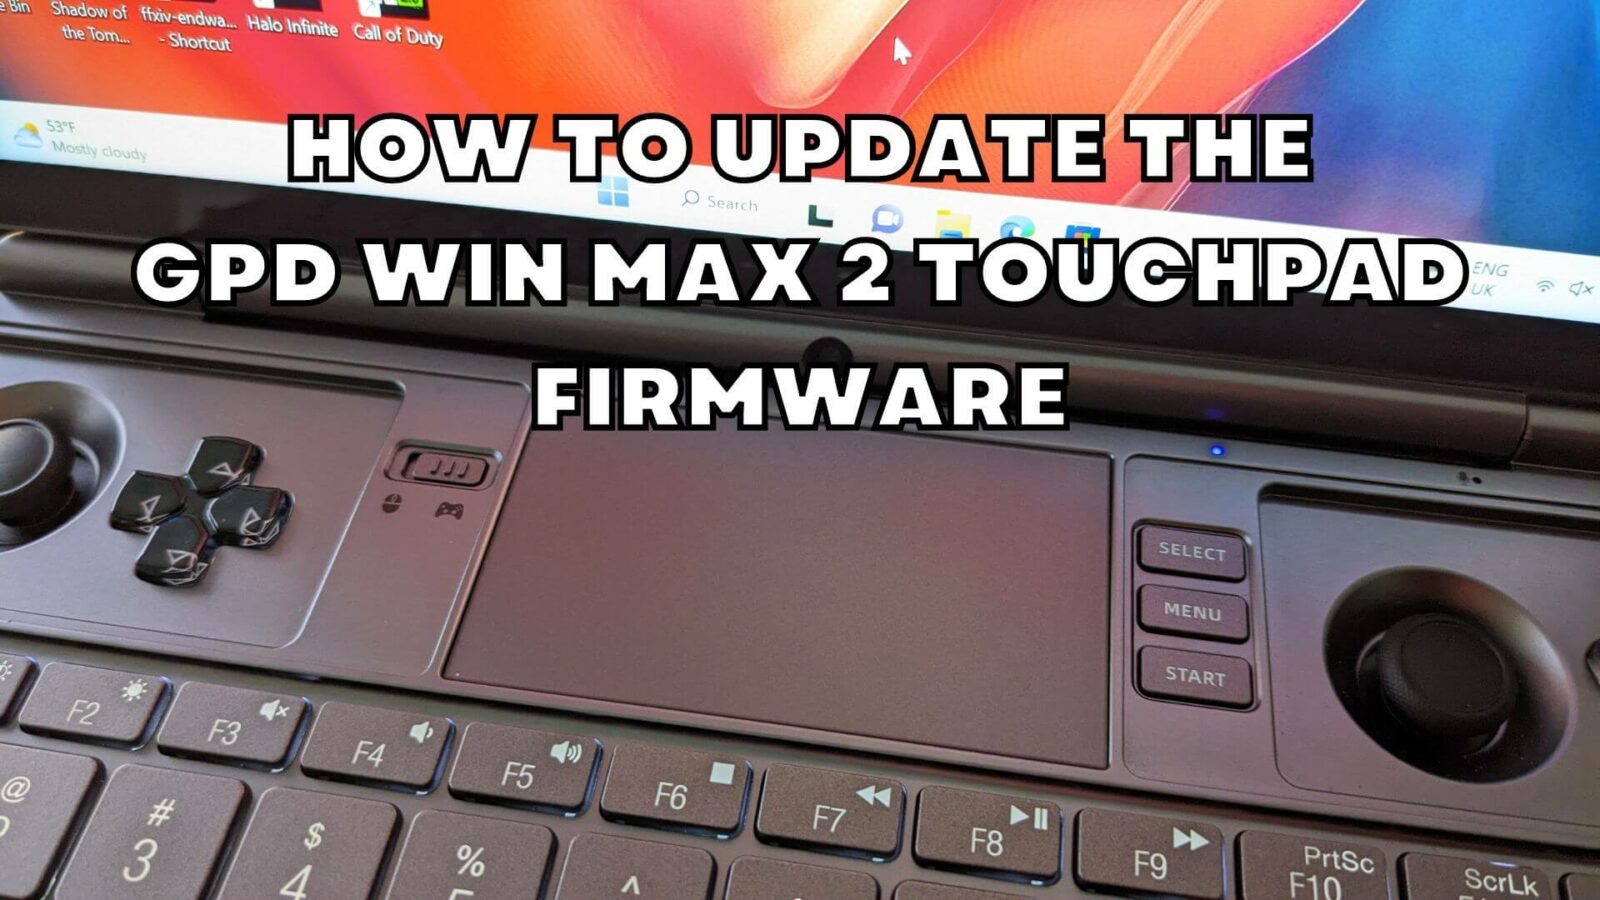 How to update the GPD WIN MAX 2 touchpad firmware